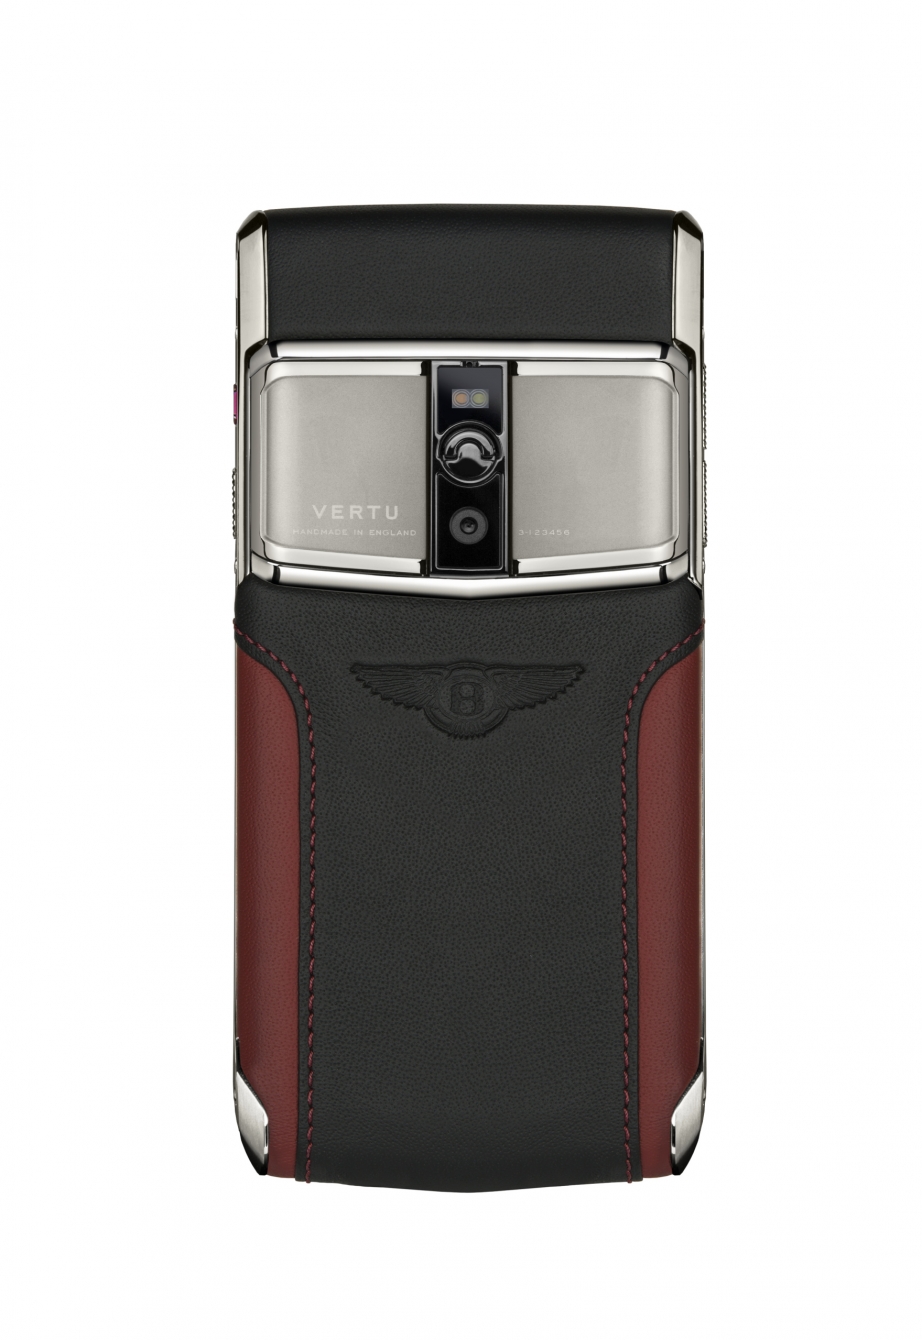 New Signature Touch for Bentley phone launched (2).jpg